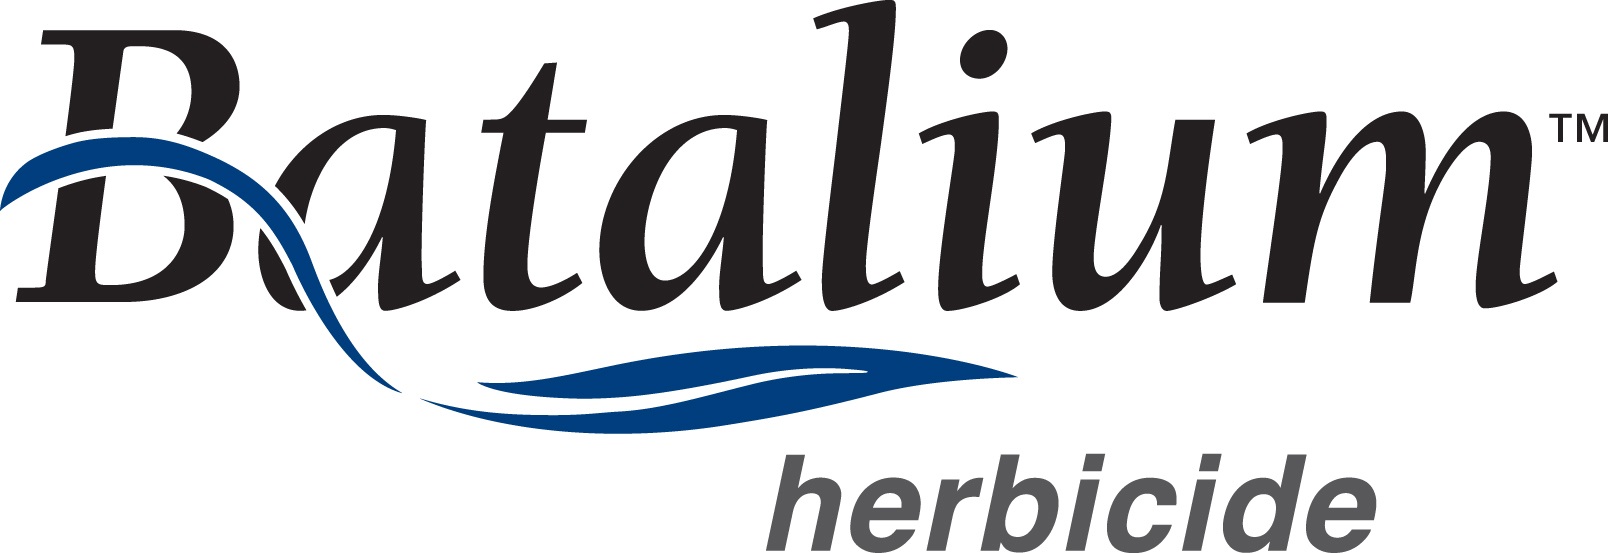 Arysta LifeScience's BATALIUM Wheat Herbicide Offers All-in-One Grass, Broadleaf Weed Control